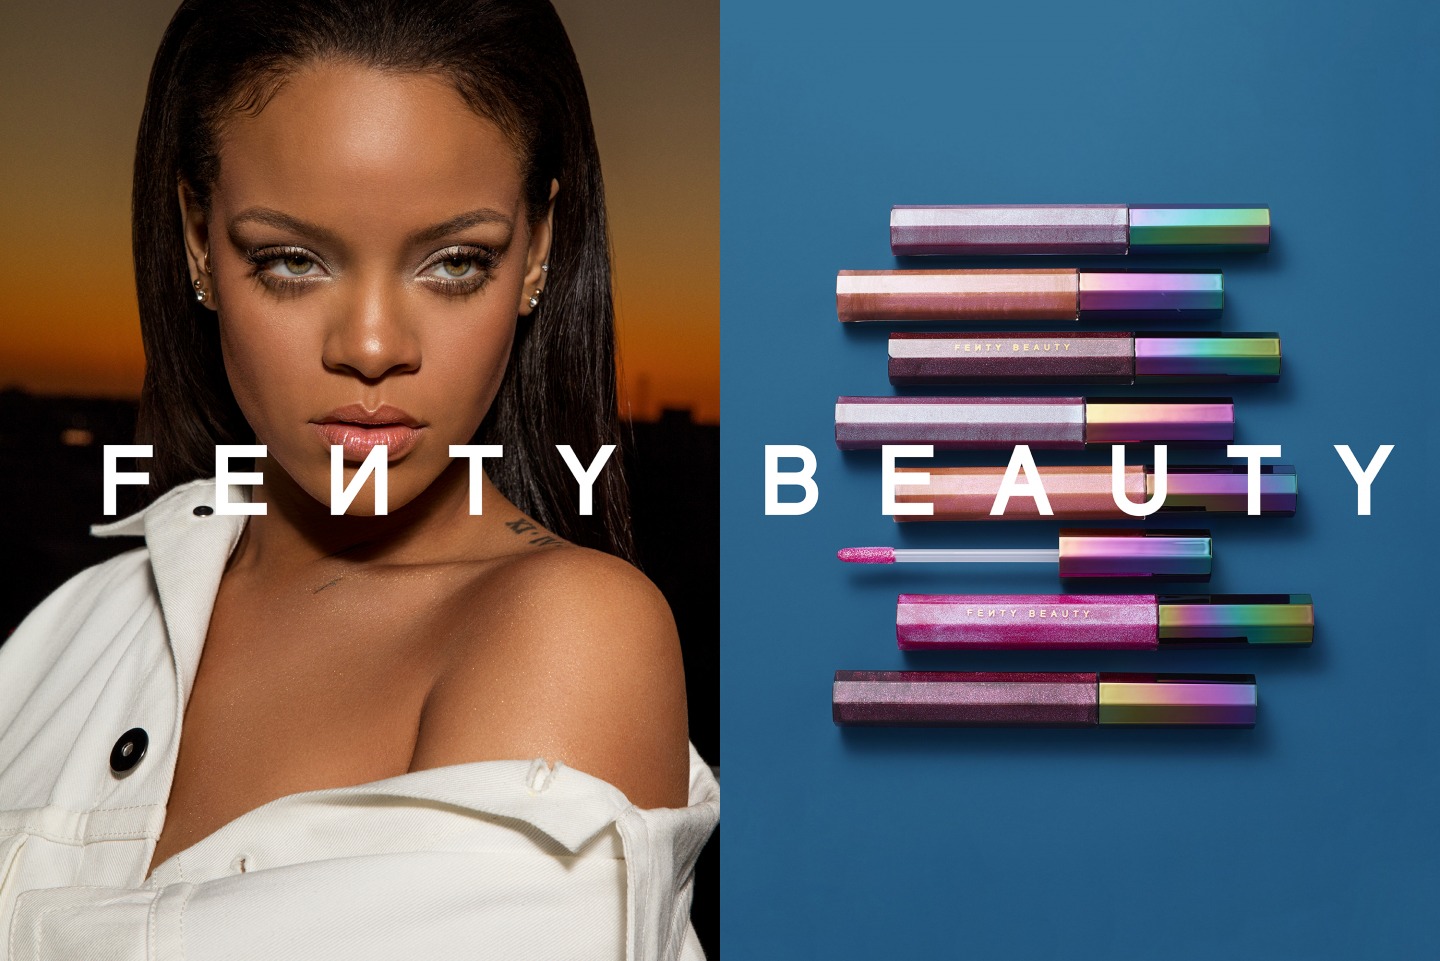 Wednesday Agency Projects - Fenty Beauty - Campaign and Website Design